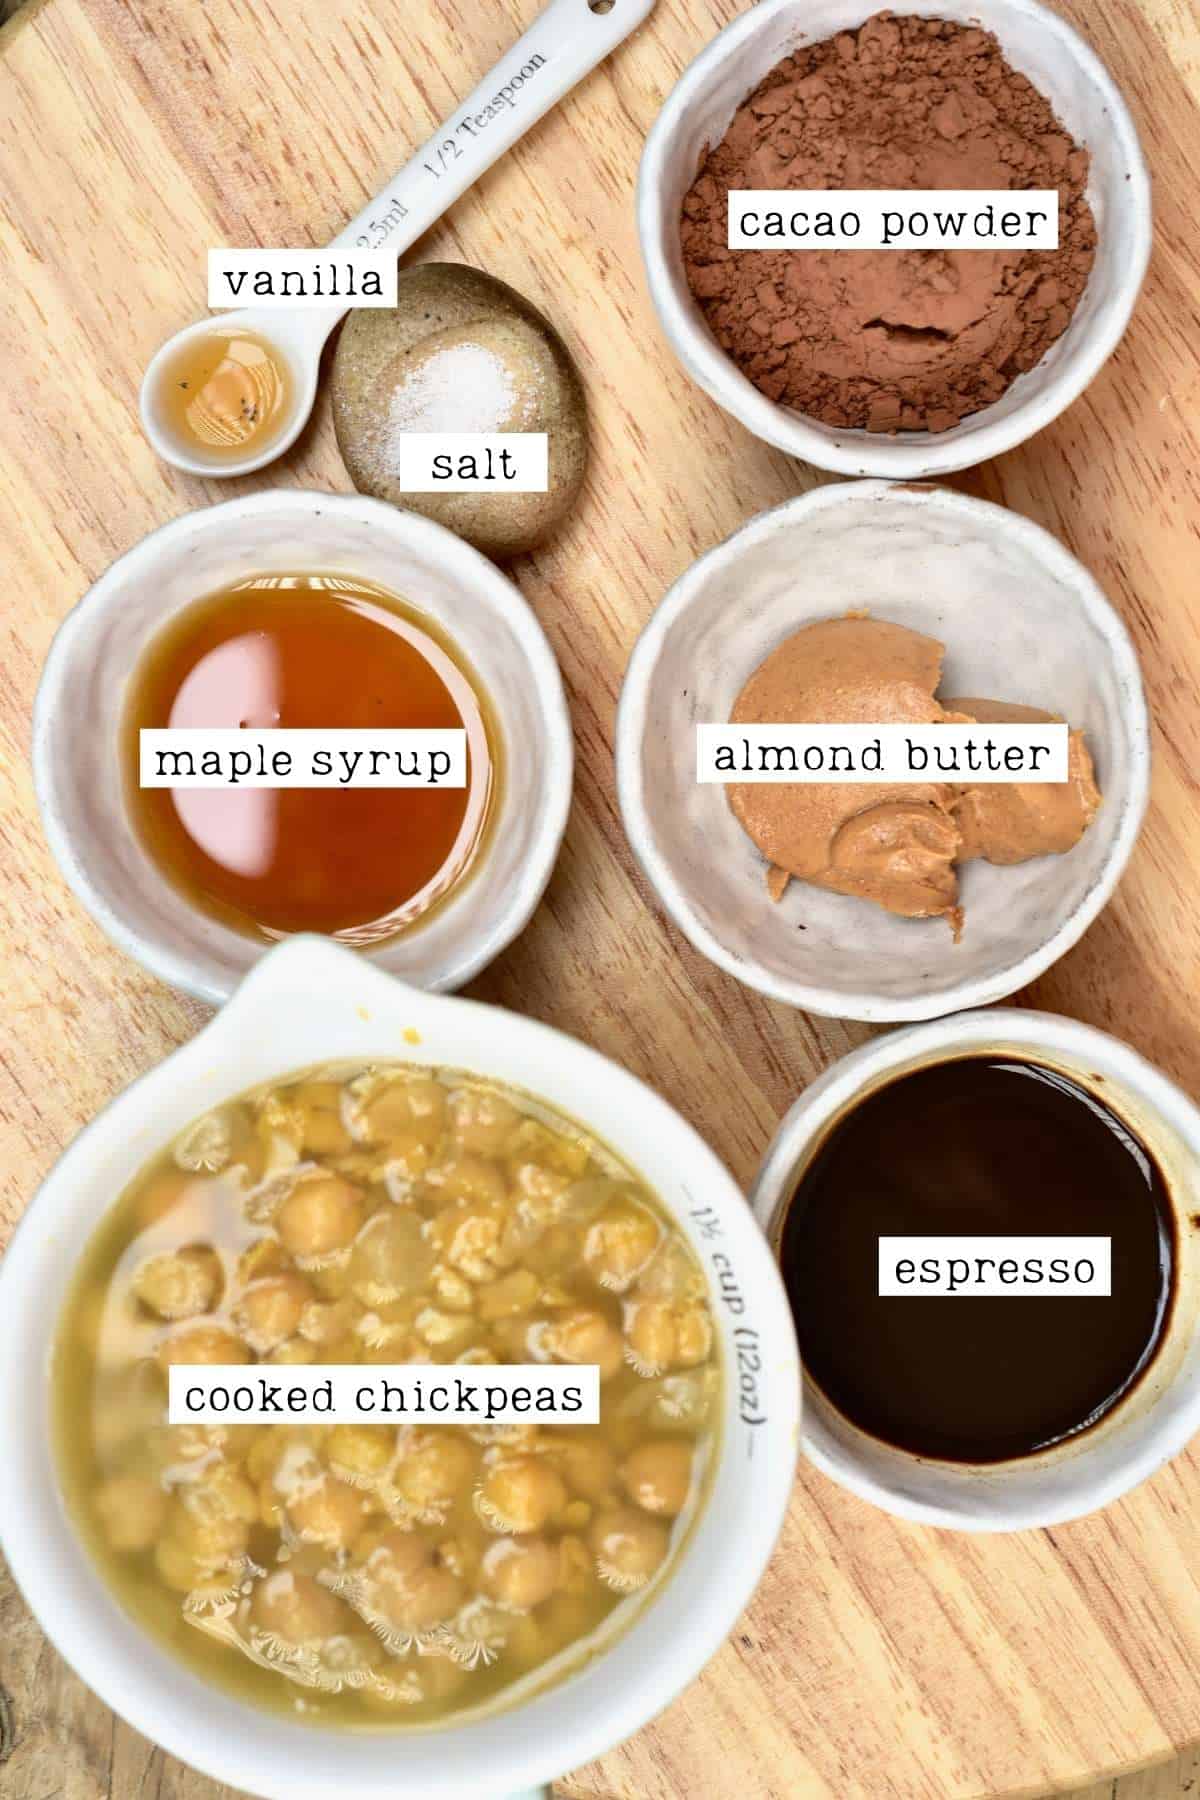 Ingredients for chocolate hummus